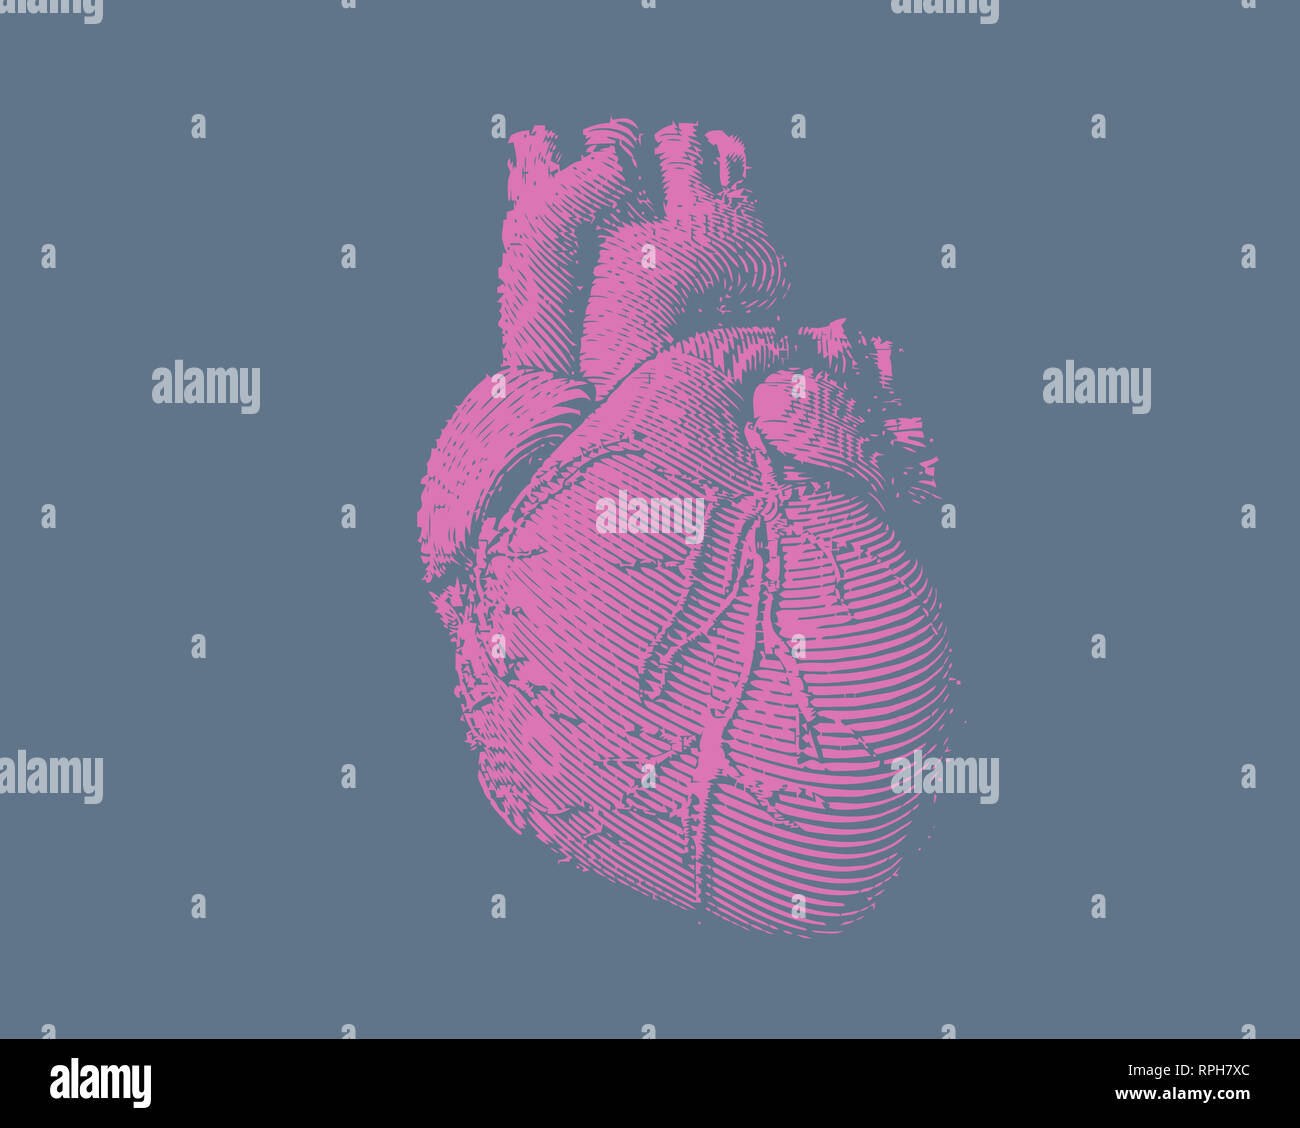 Engraving colorful pink human heart illustration on blue gray background Stock Photo